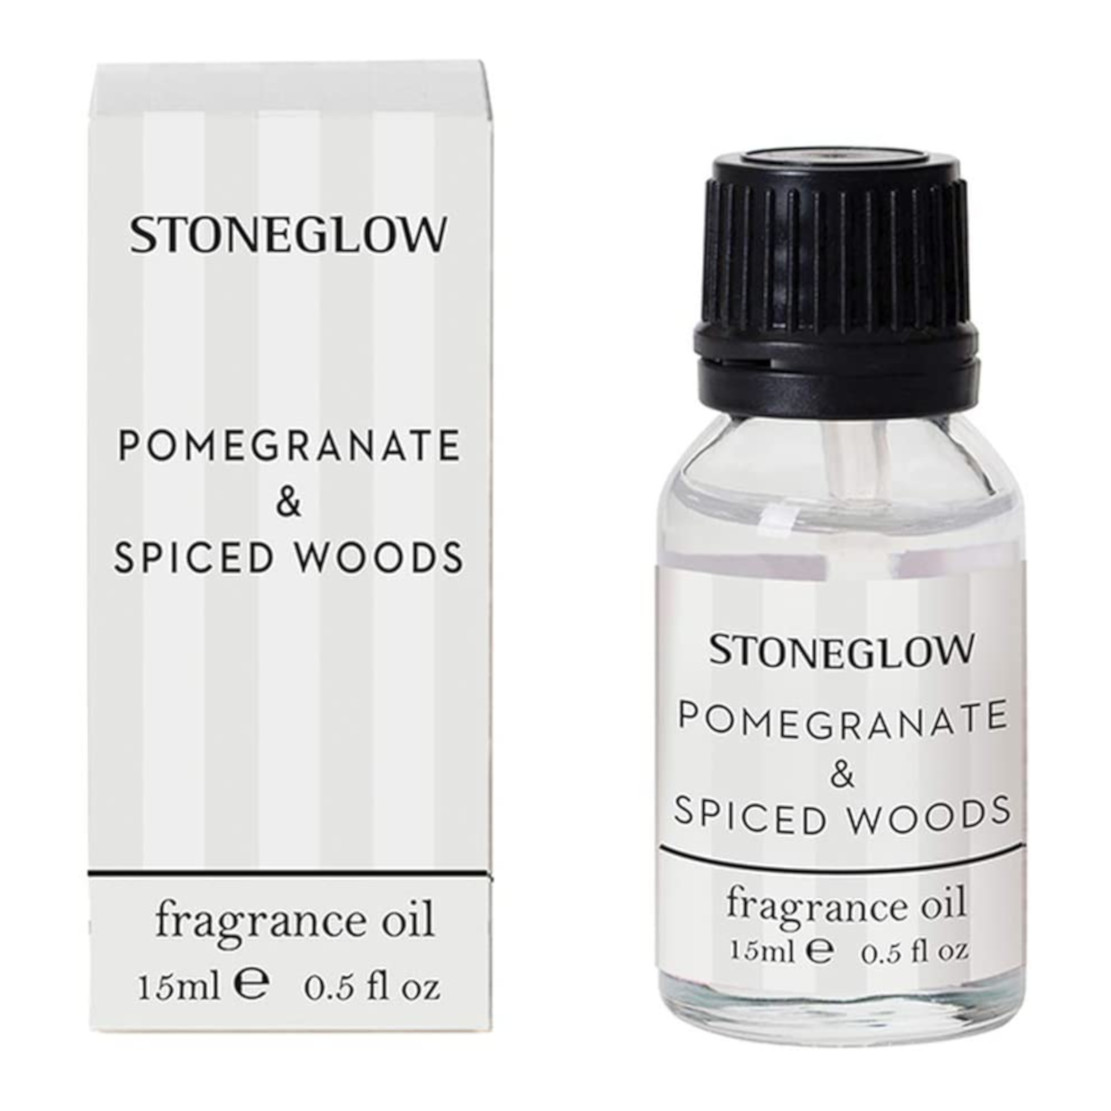 Stoneglow Pomegranate & Spiced Woods Fragrance Oil 15ml